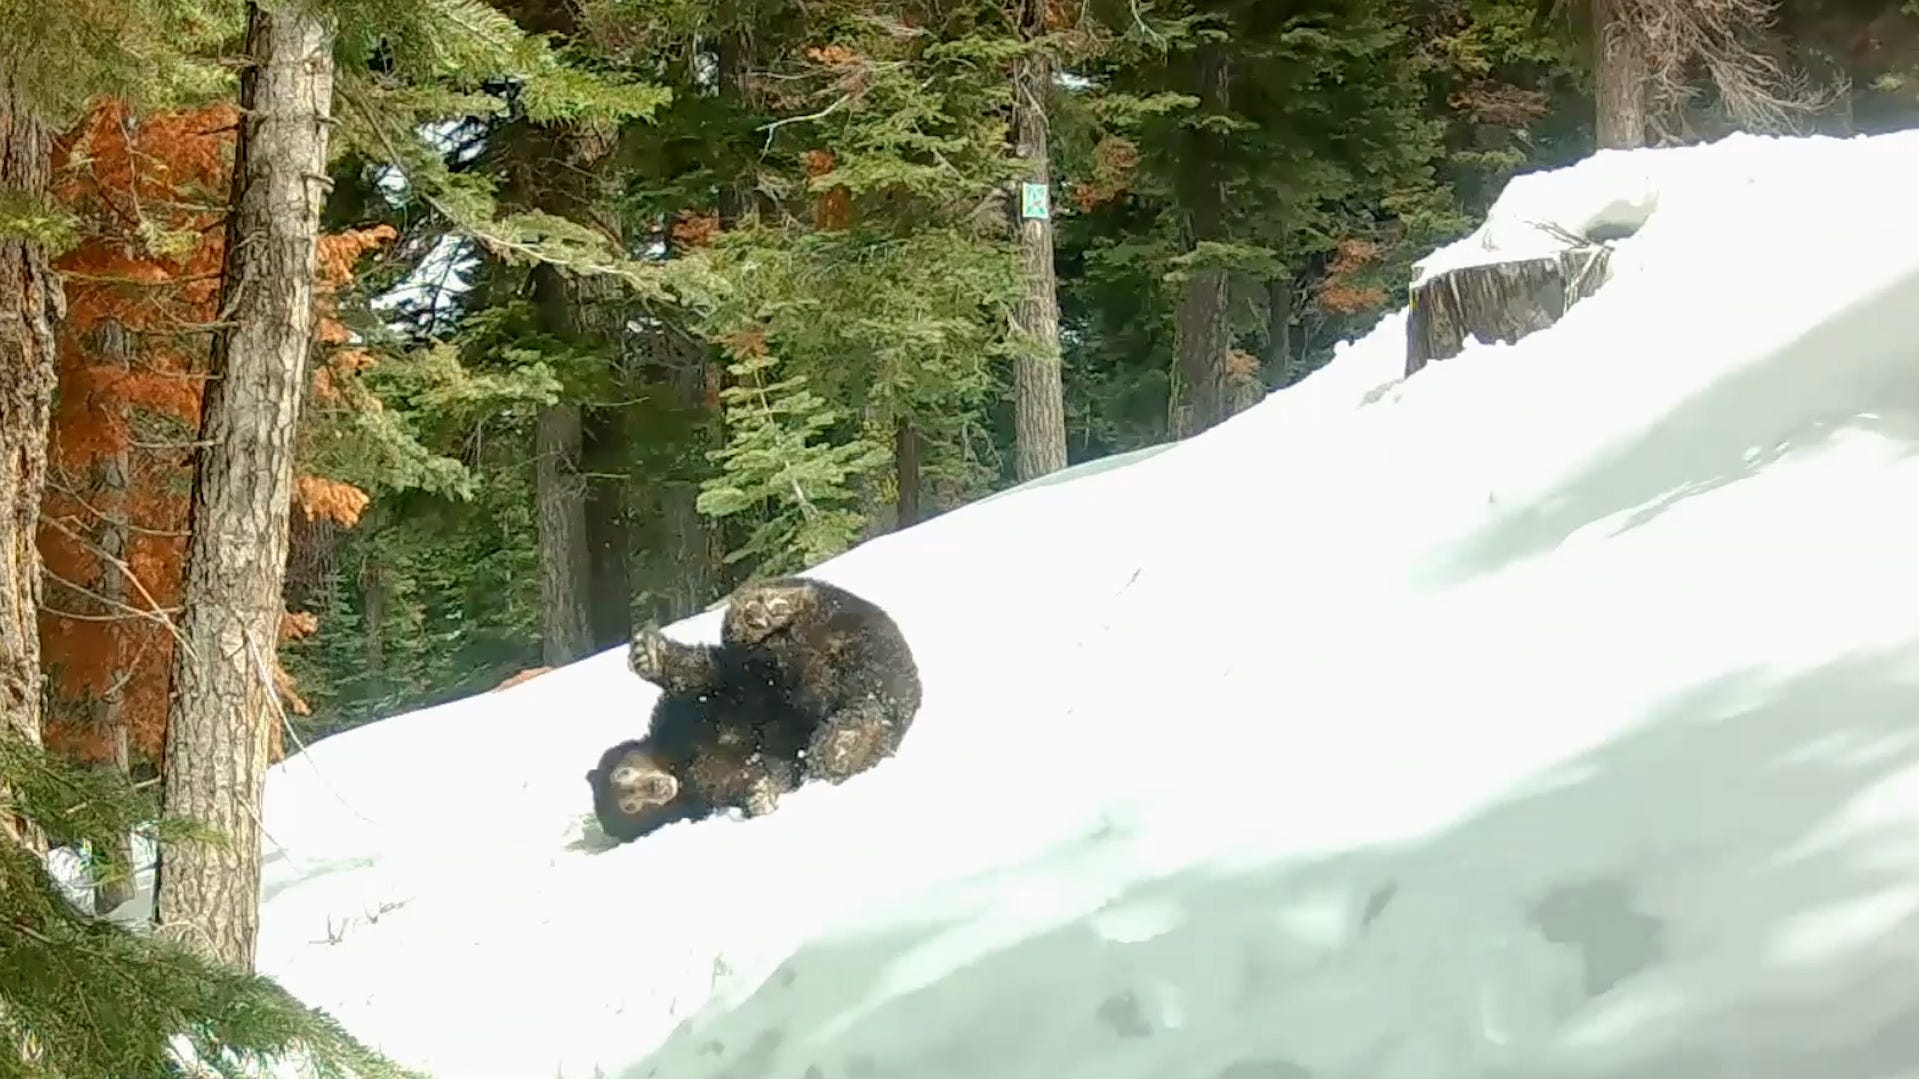 Bears just wanna have fun! Black bear spotted tumbling down snowy hill.